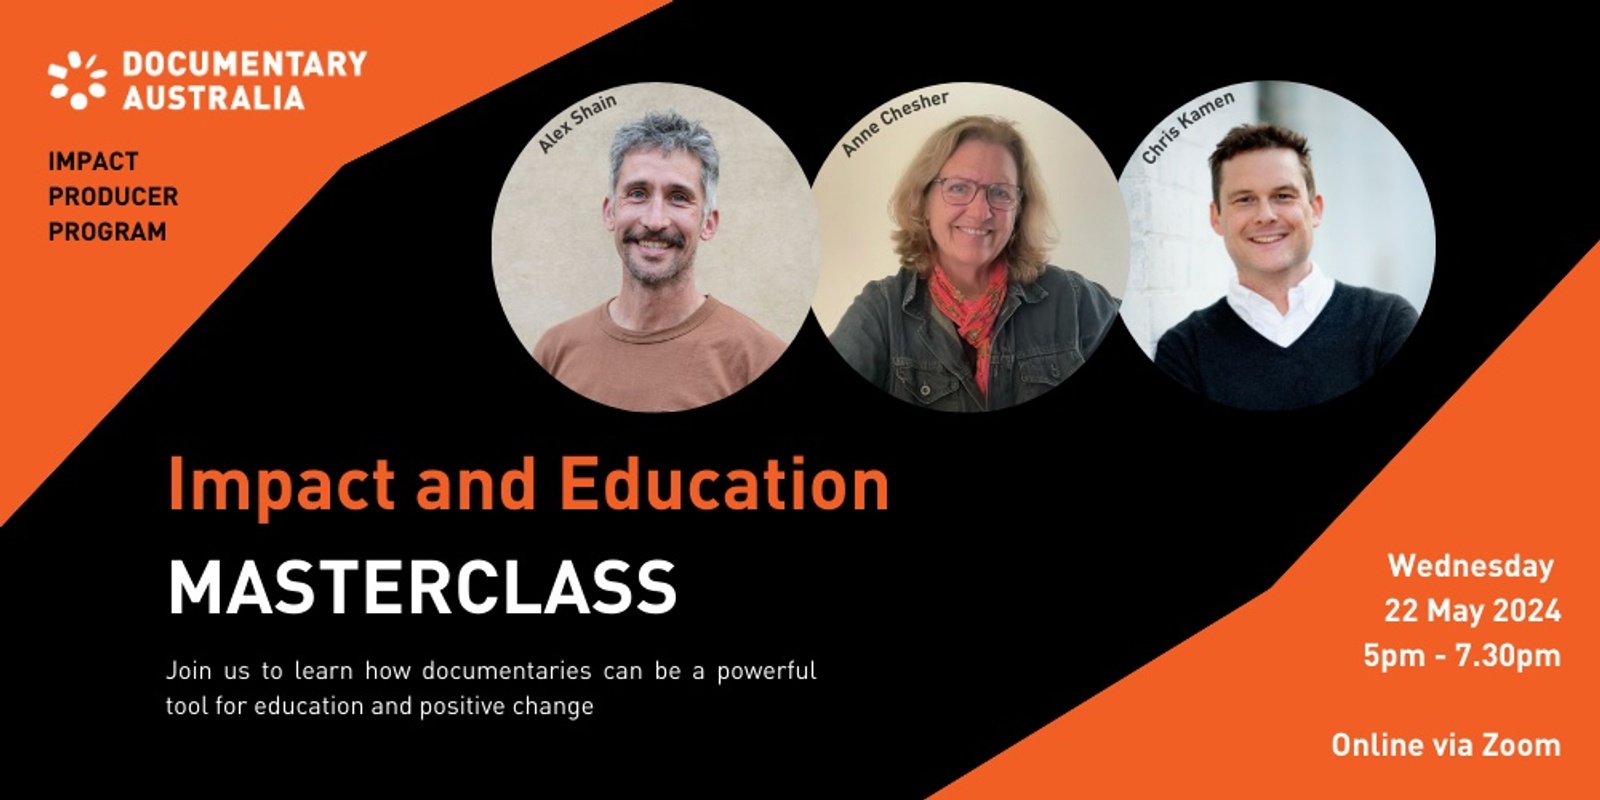 Banner image for Impact and Education Masterclass: Online